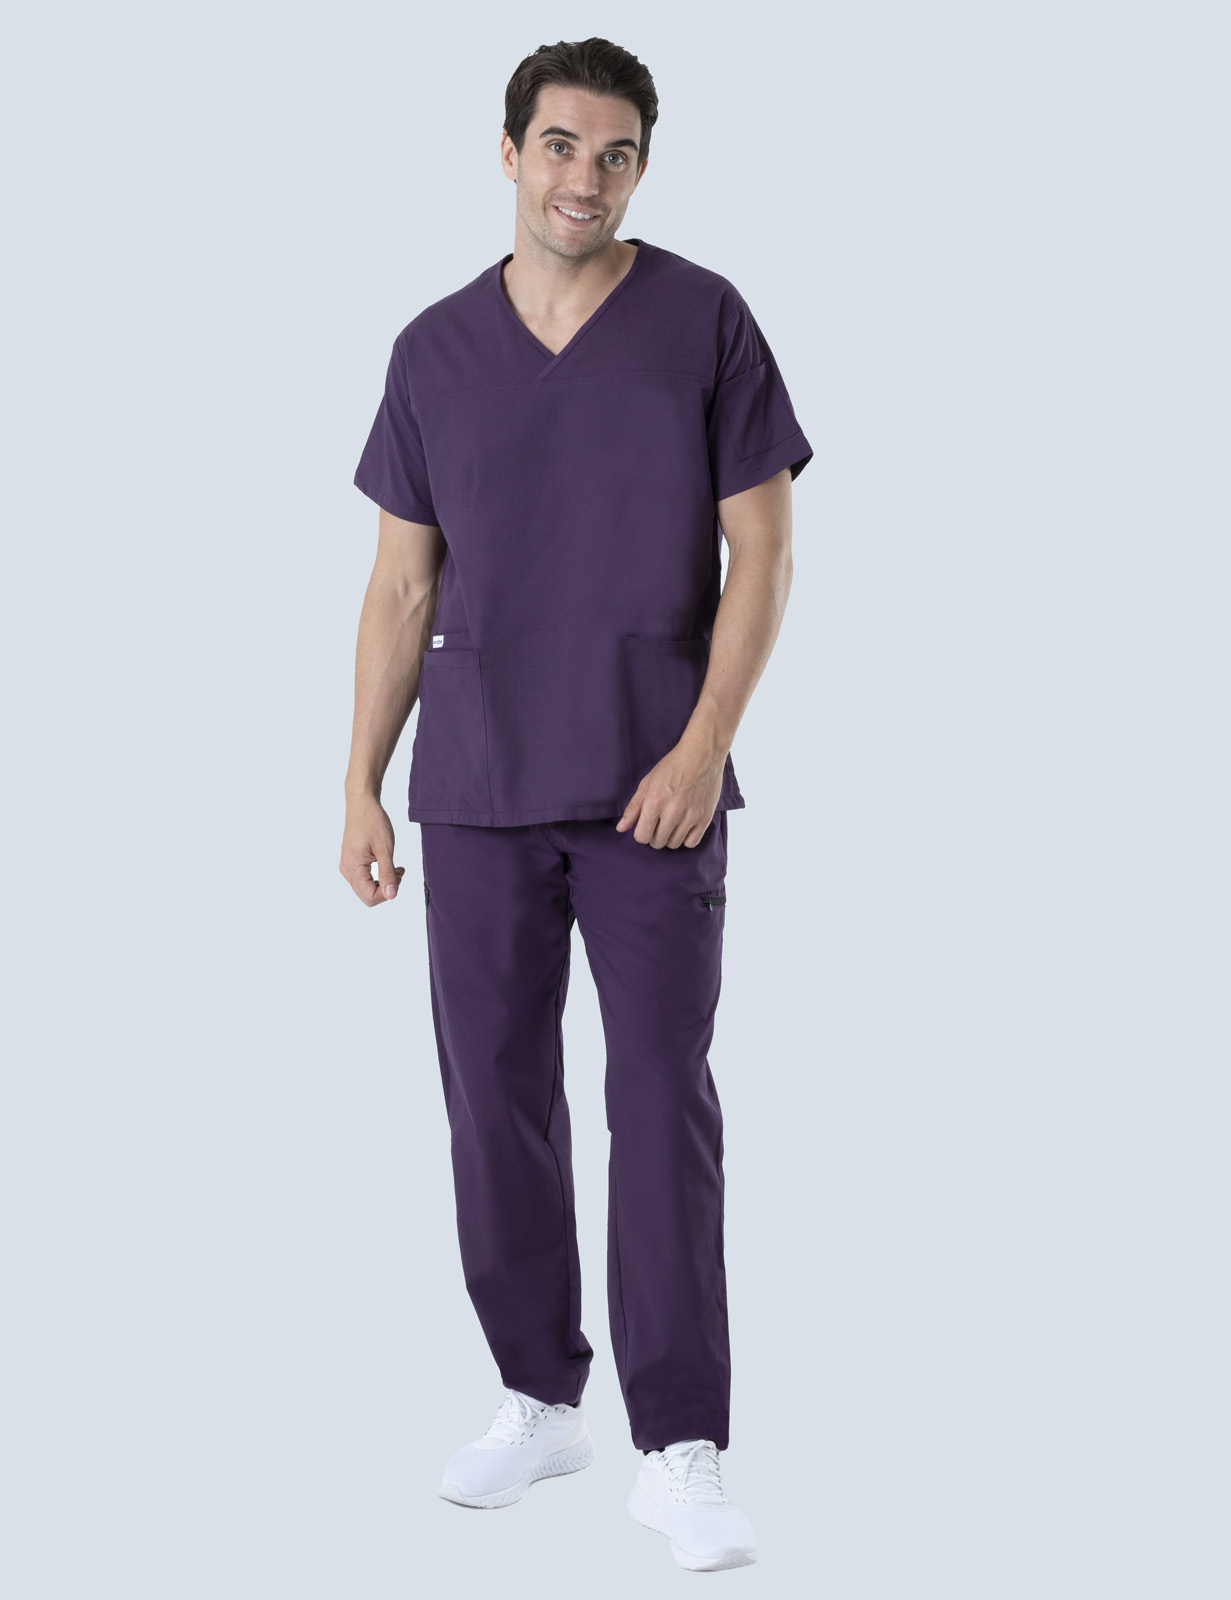 Townsville Hospital Pharmacy Uniform Top Only Bundle (Men's Fit Solid in Aubergine incl Logos)